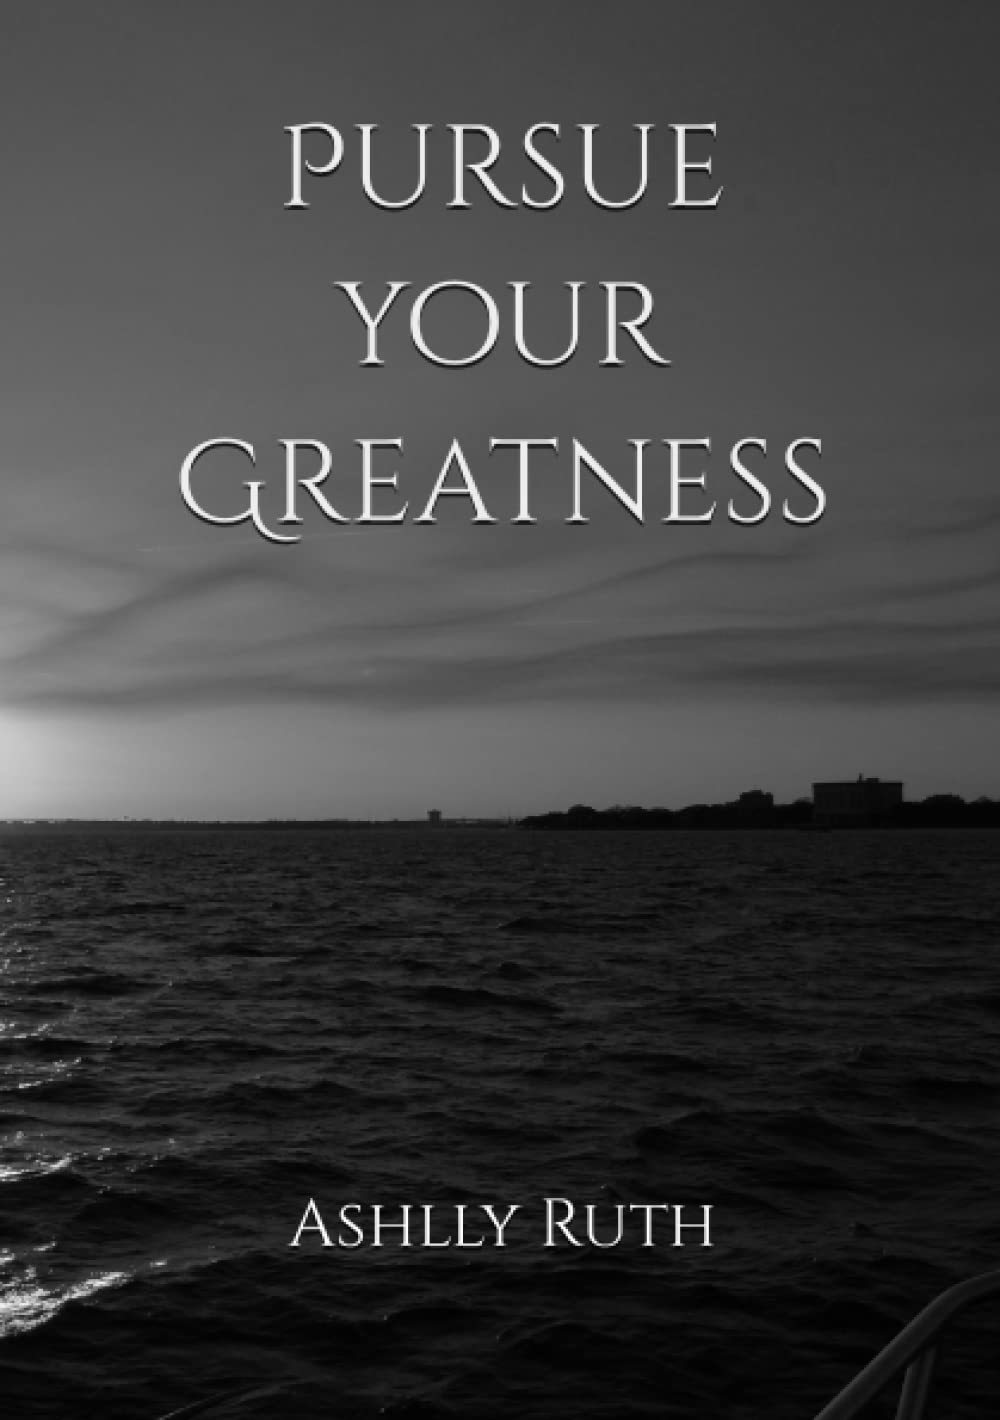 Pursue your Greatness